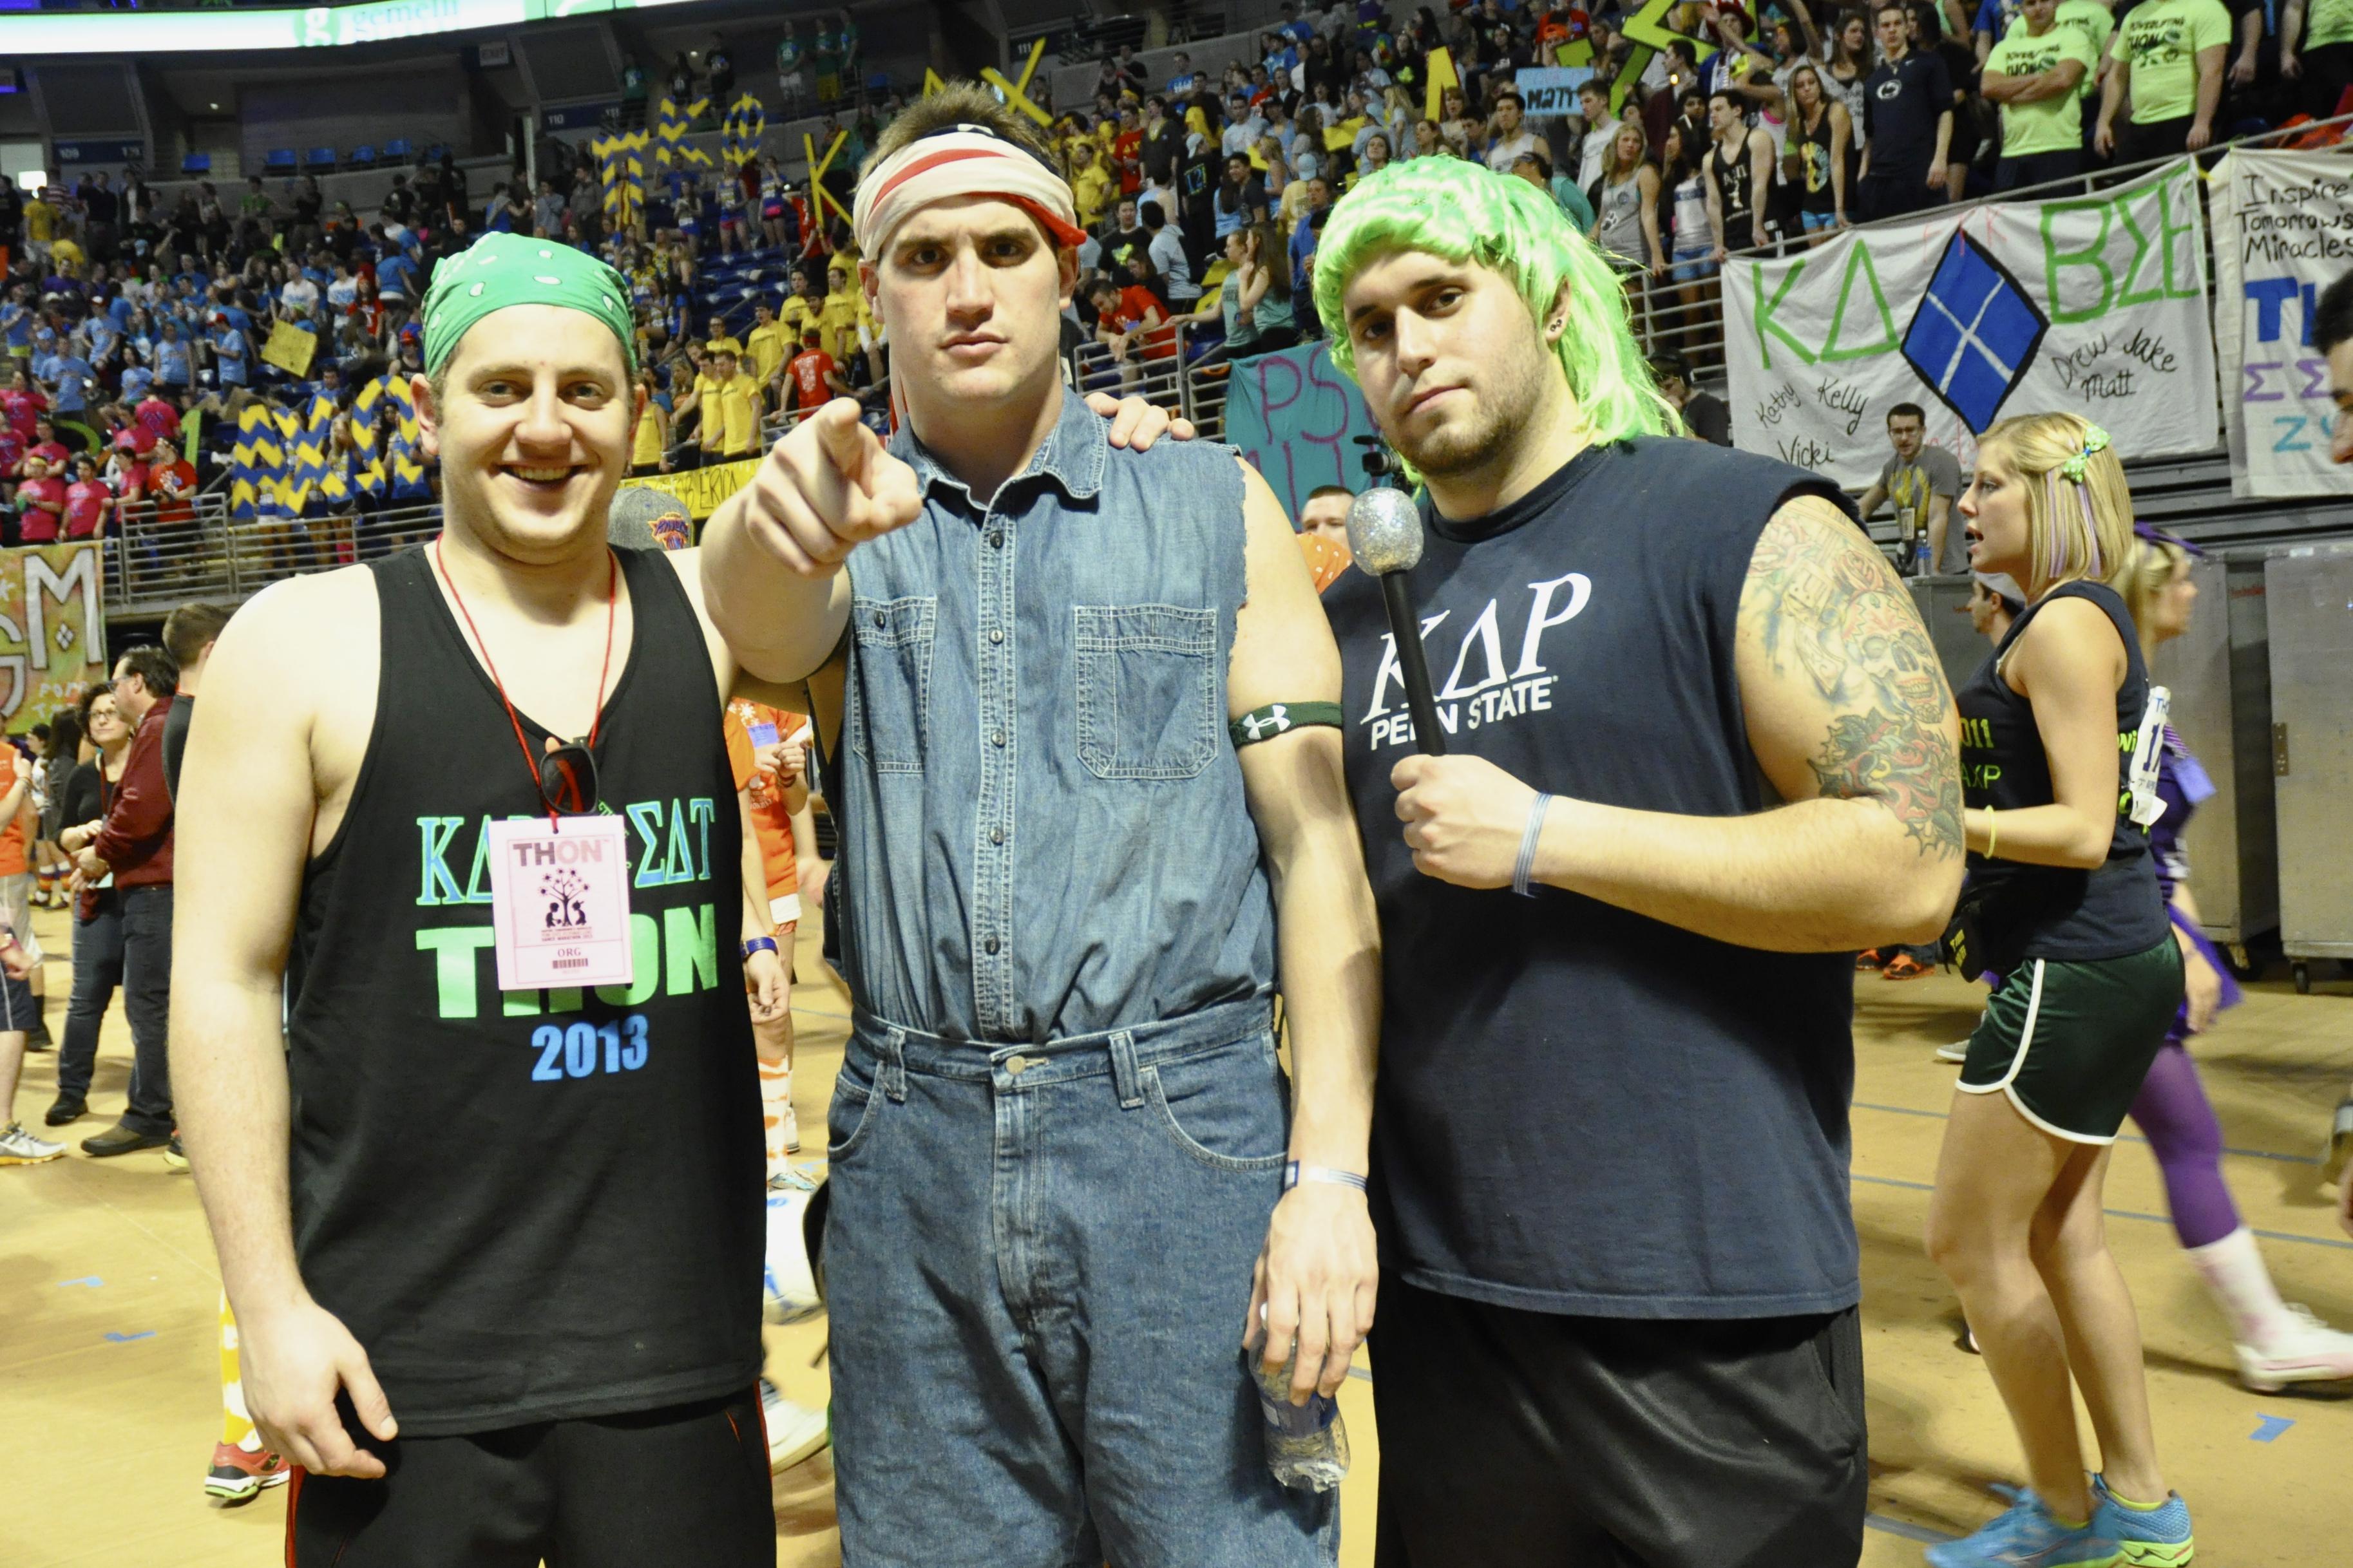 THON 2013: Wackiest Outfits in the BJC